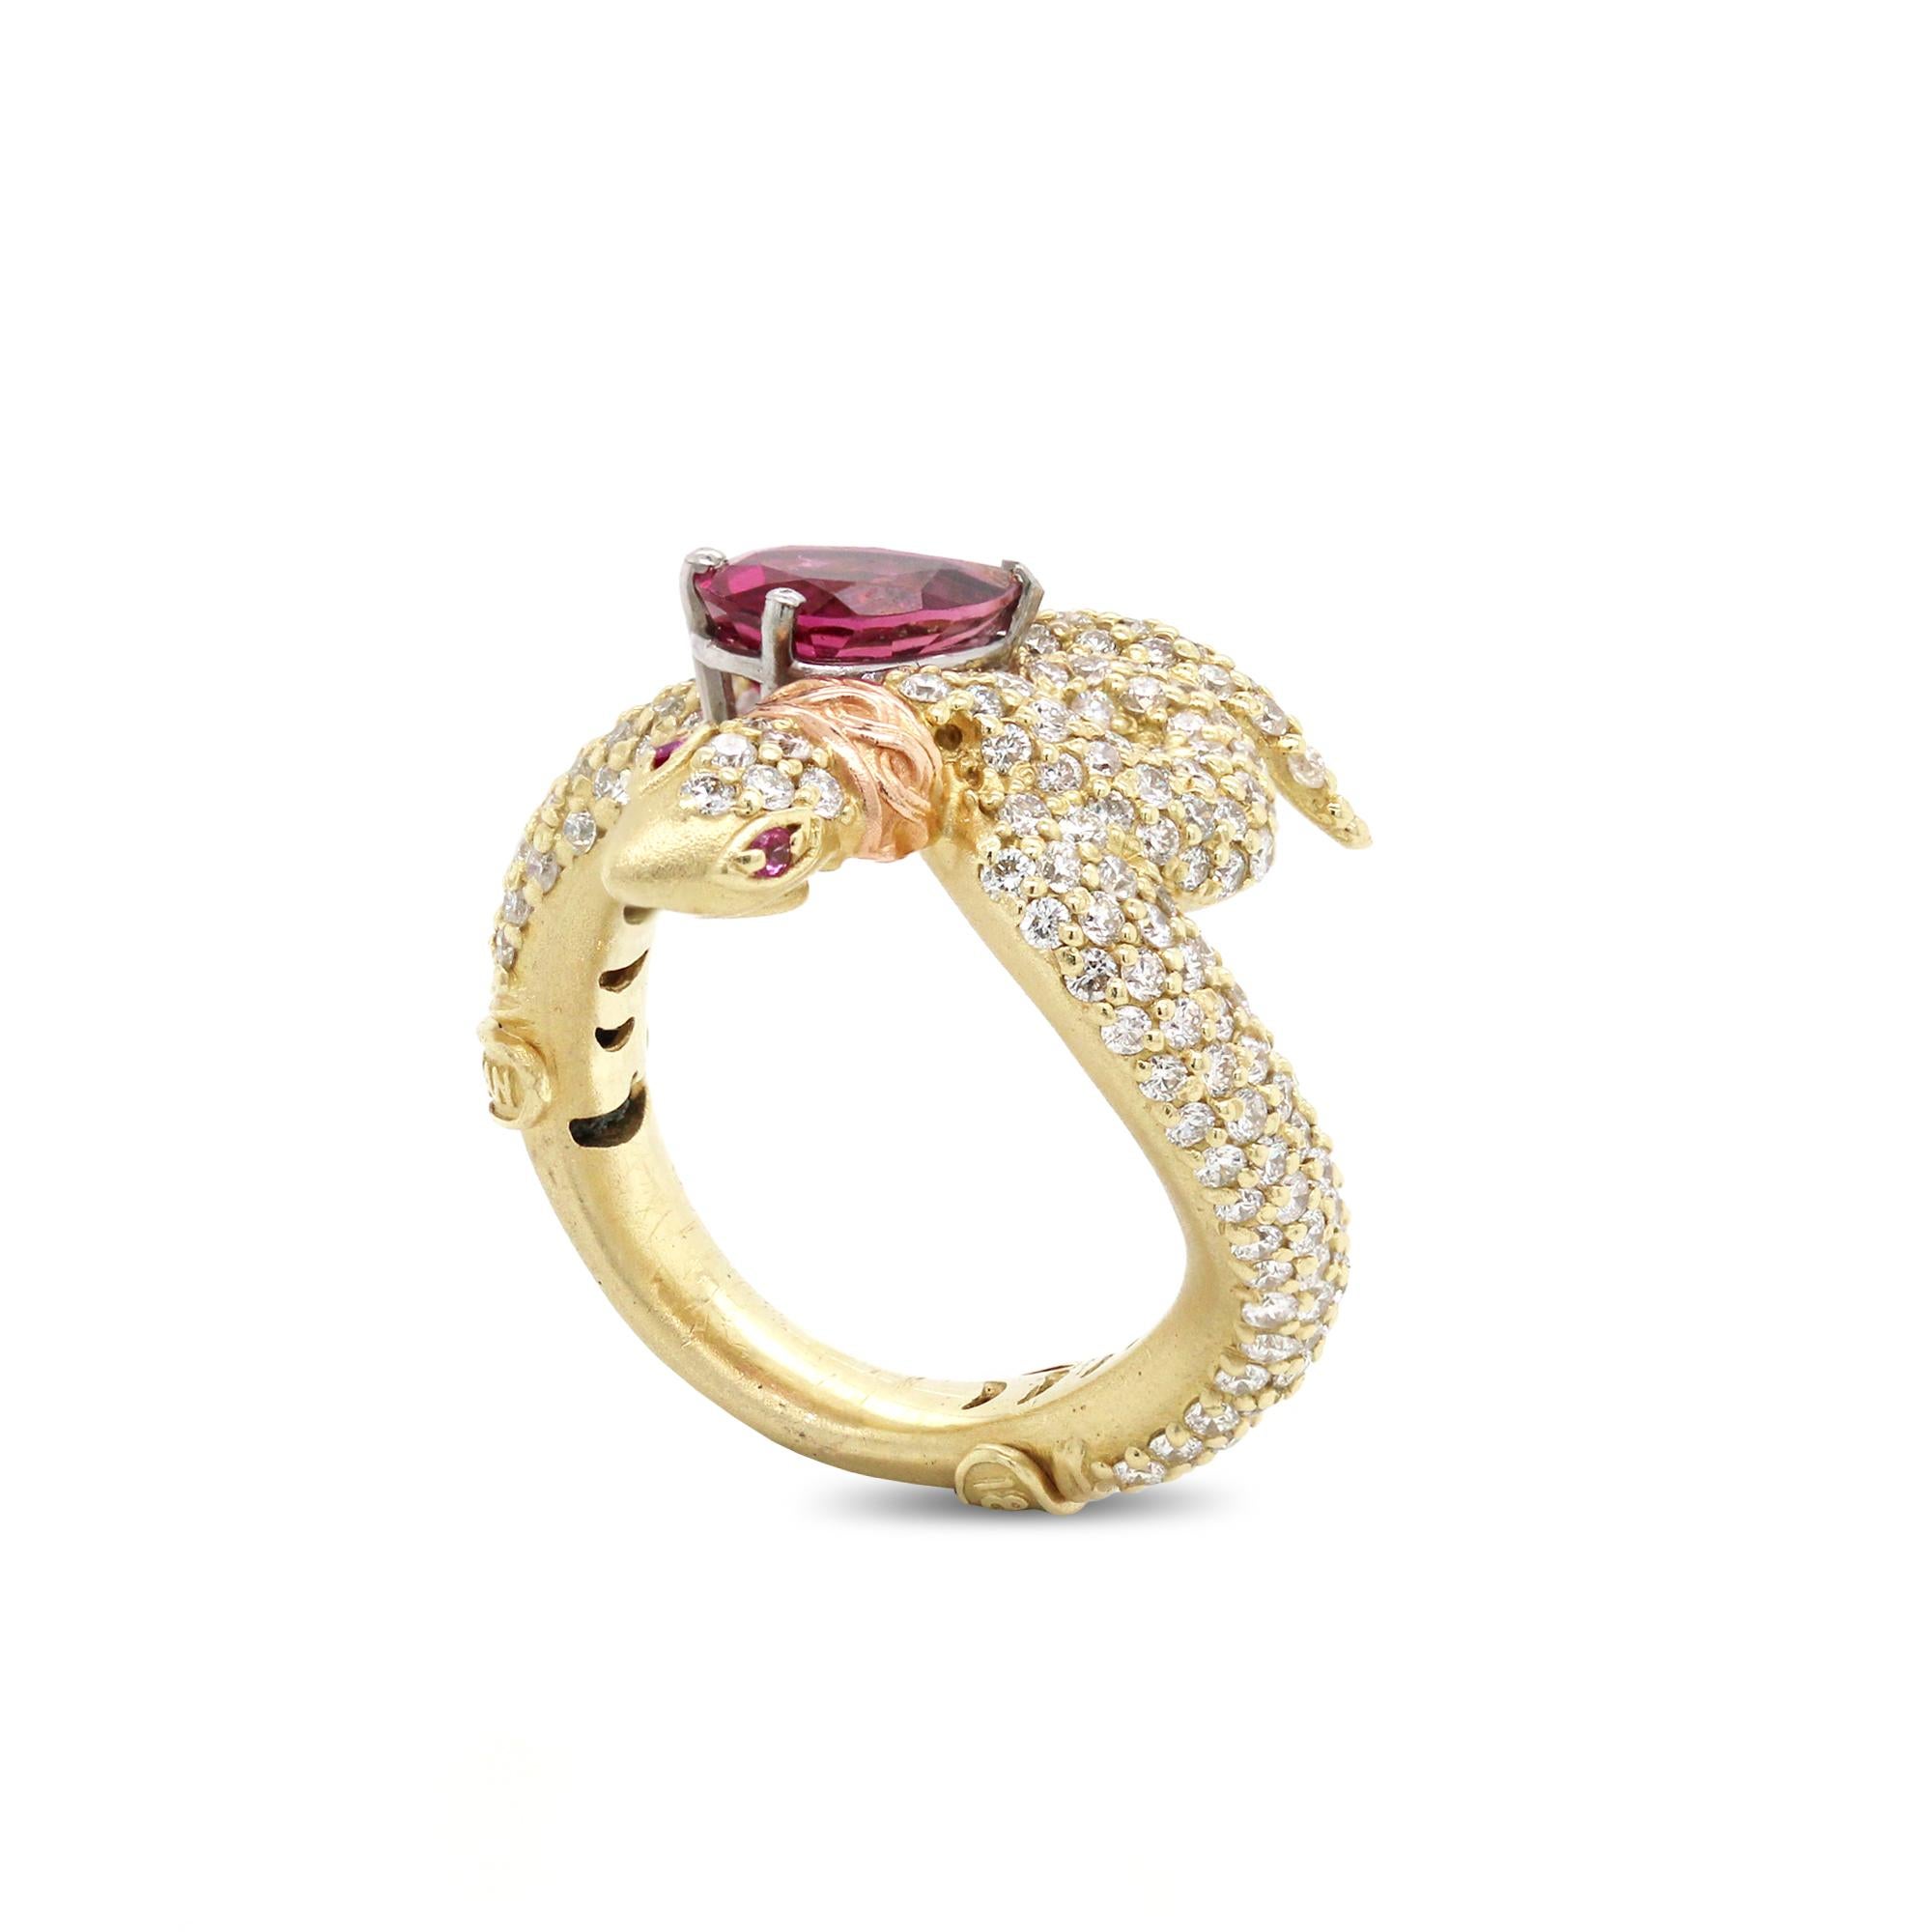 18K Yellow Gold and Diamond Snake Ring with Pear Shape Rubellite Tourmaline and Pink Sapphires by Stambolian

This one-of-a-kind ring by Stambolian is a staple of perfection with beautiful detail and design work. The eyes of the snake have pink